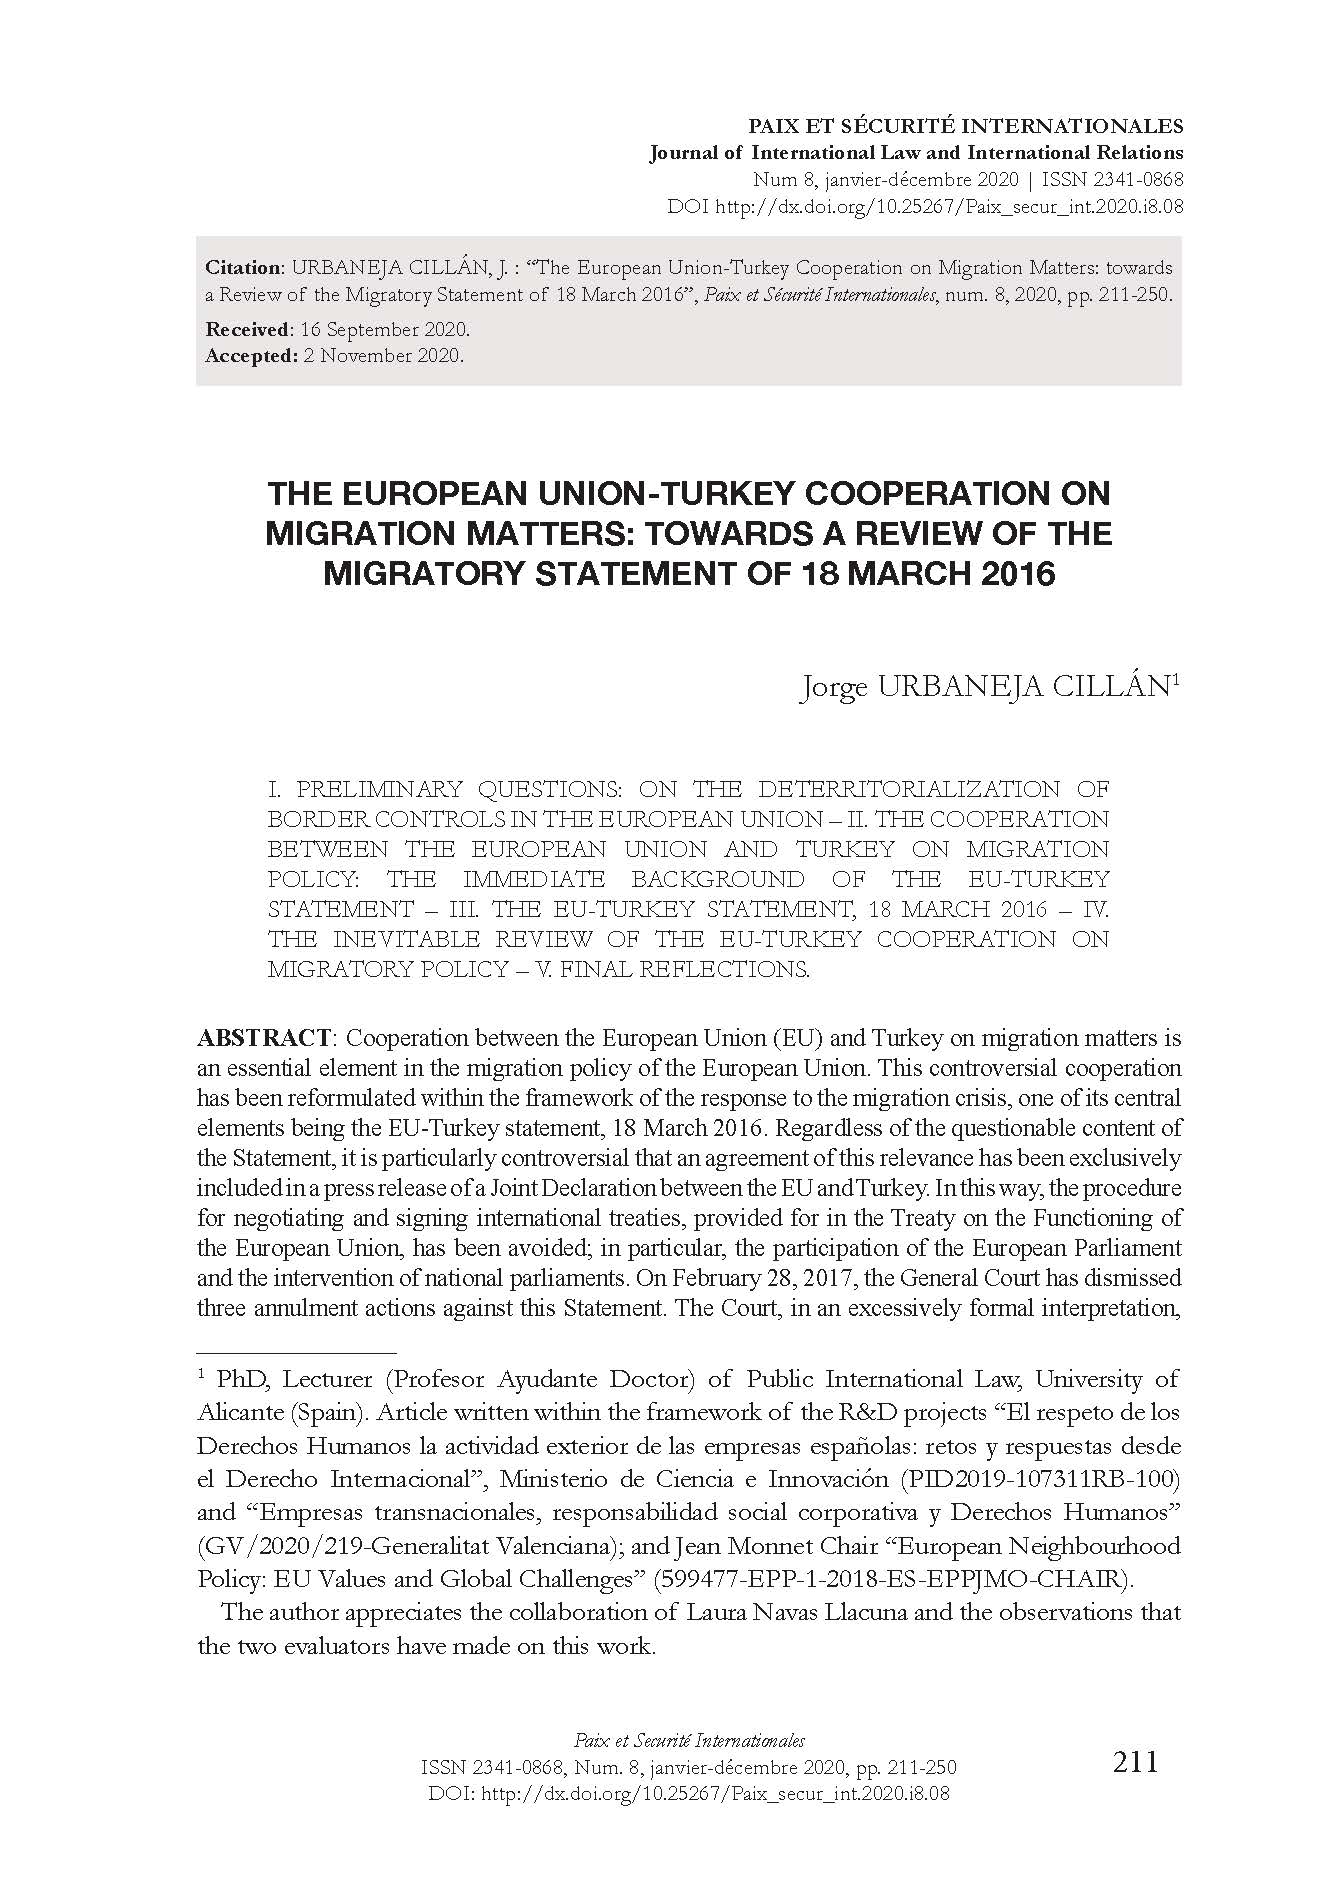 The European Union-Turkey Cooperation on Migration matters: Towards a Review of the Migratory Statement of 18 march 2016